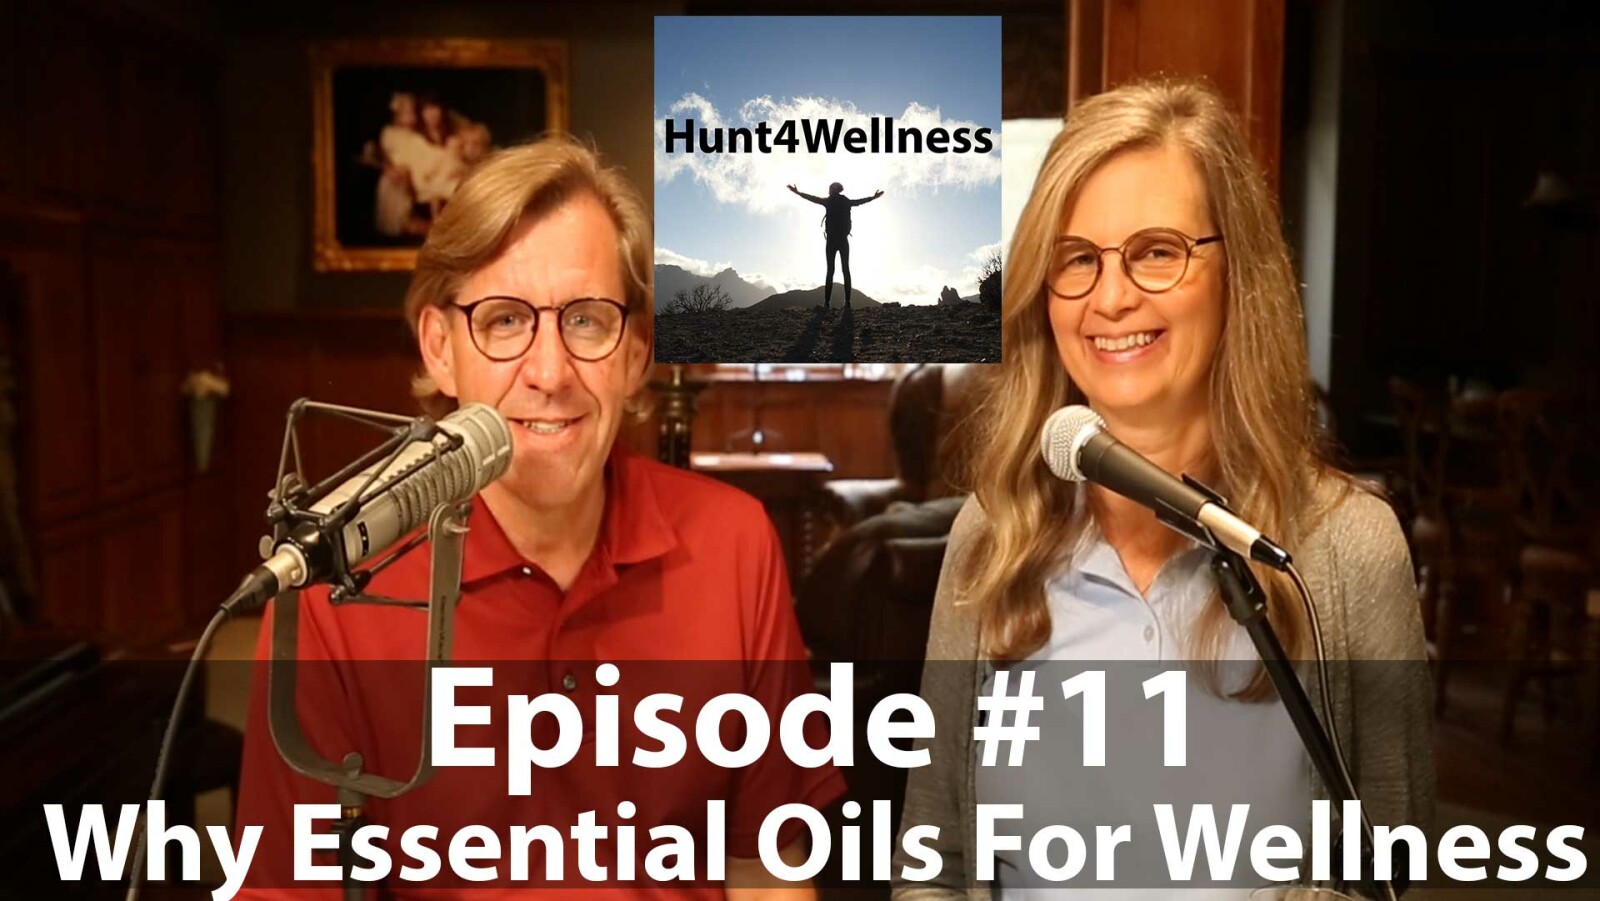 Episode #11 - Why Essential Oils For Wellness